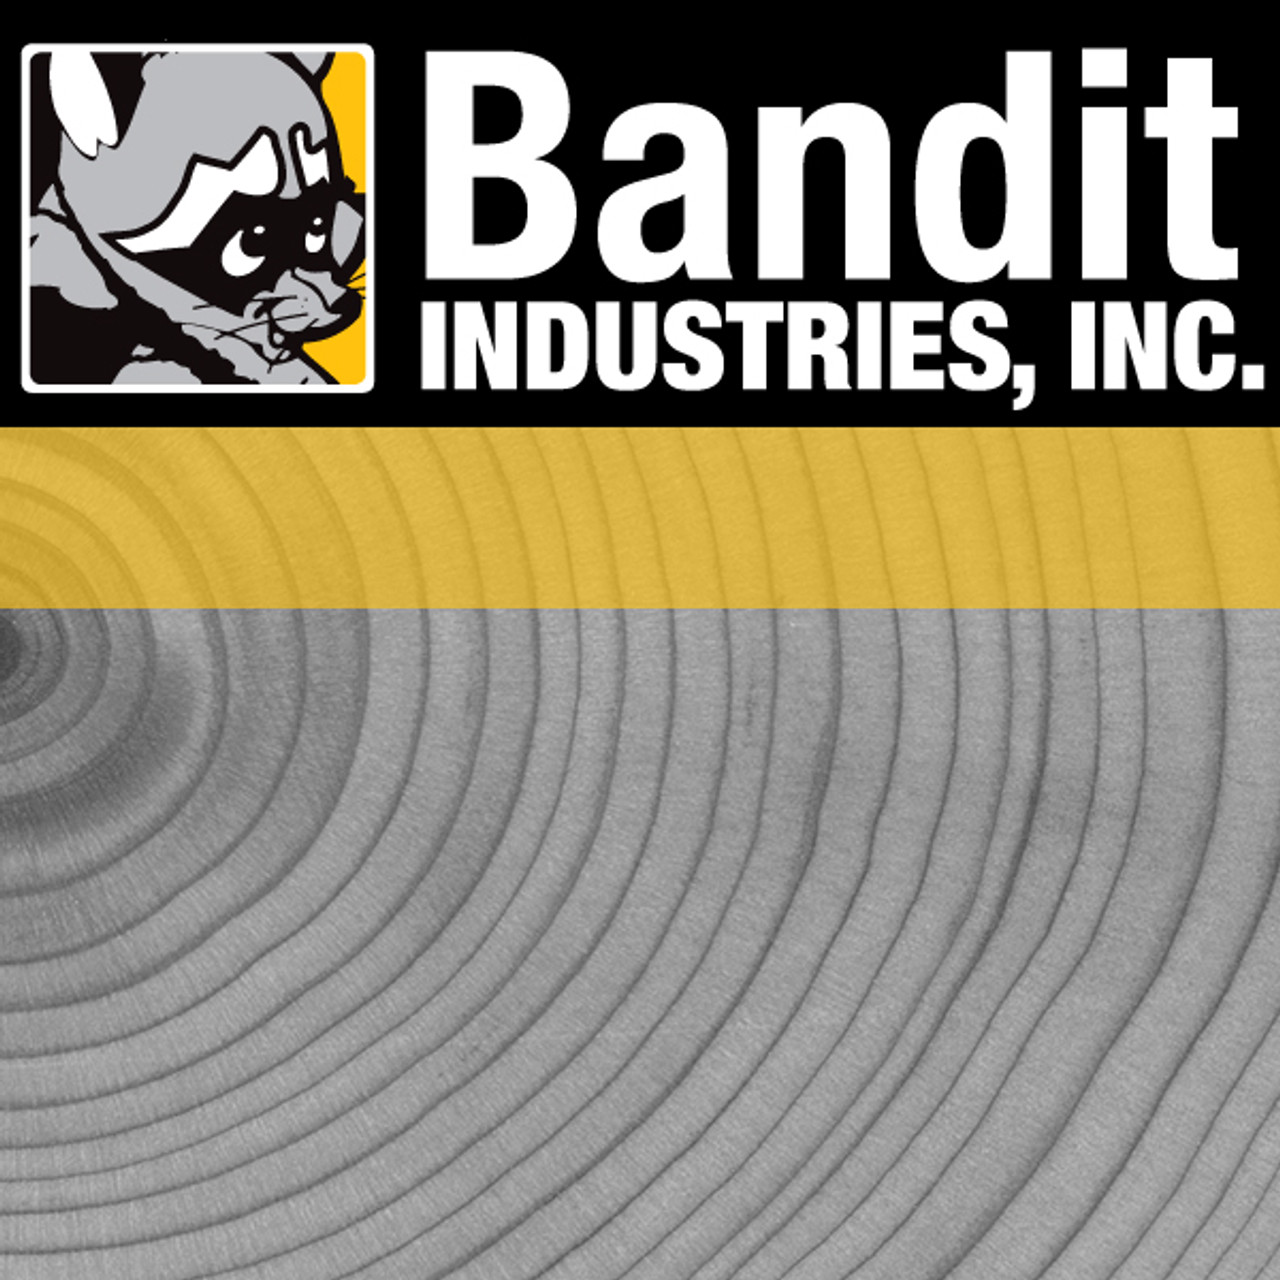 900-2902-44: BANDIT YELLOW HEAT SHRINKABLE BUTT CONNECTOR (12-10 WIRE)